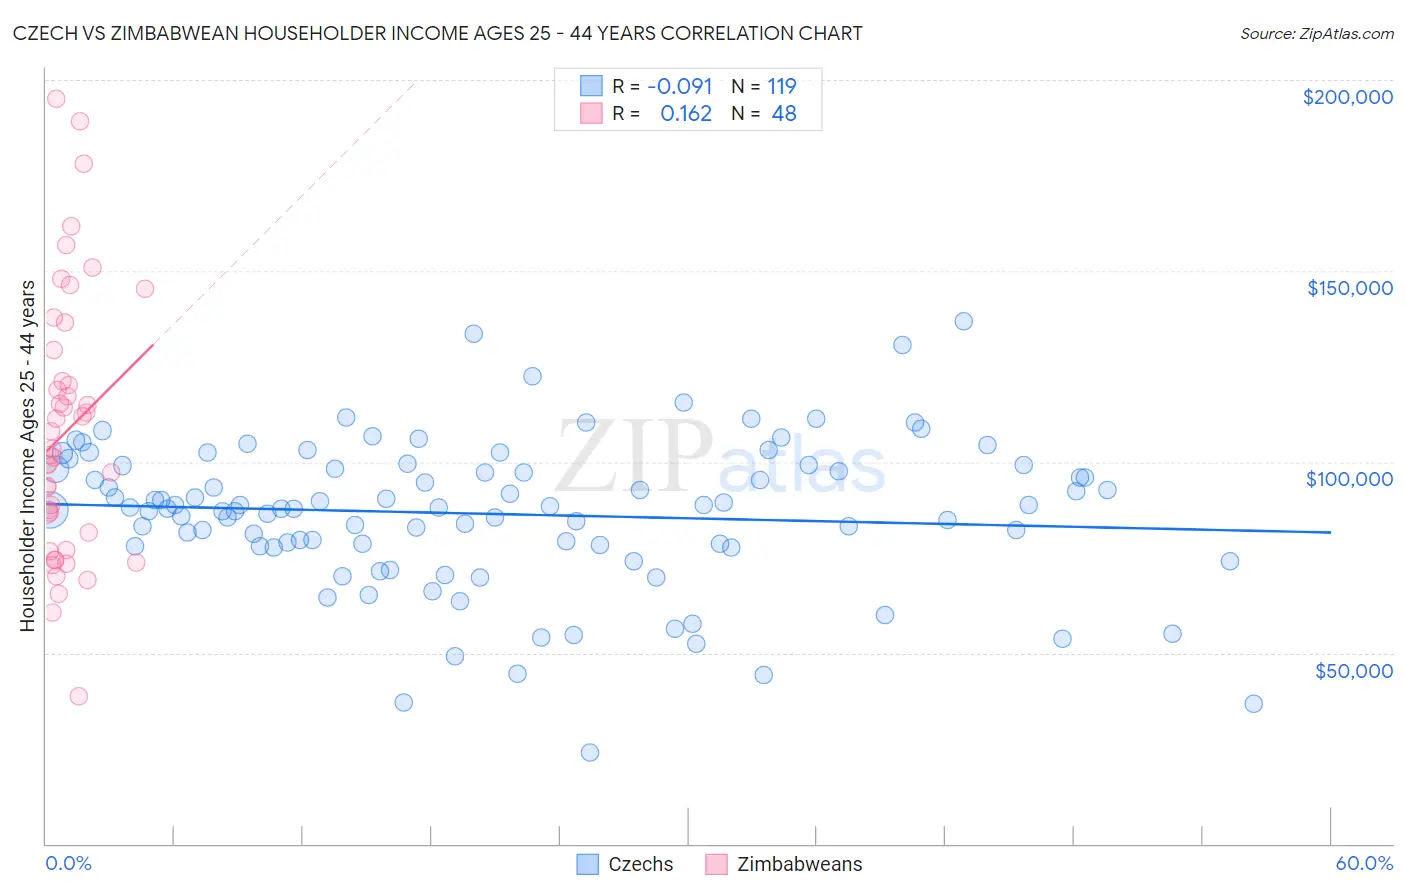 Czech vs Zimbabwean Householder Income Ages 25 - 44 years